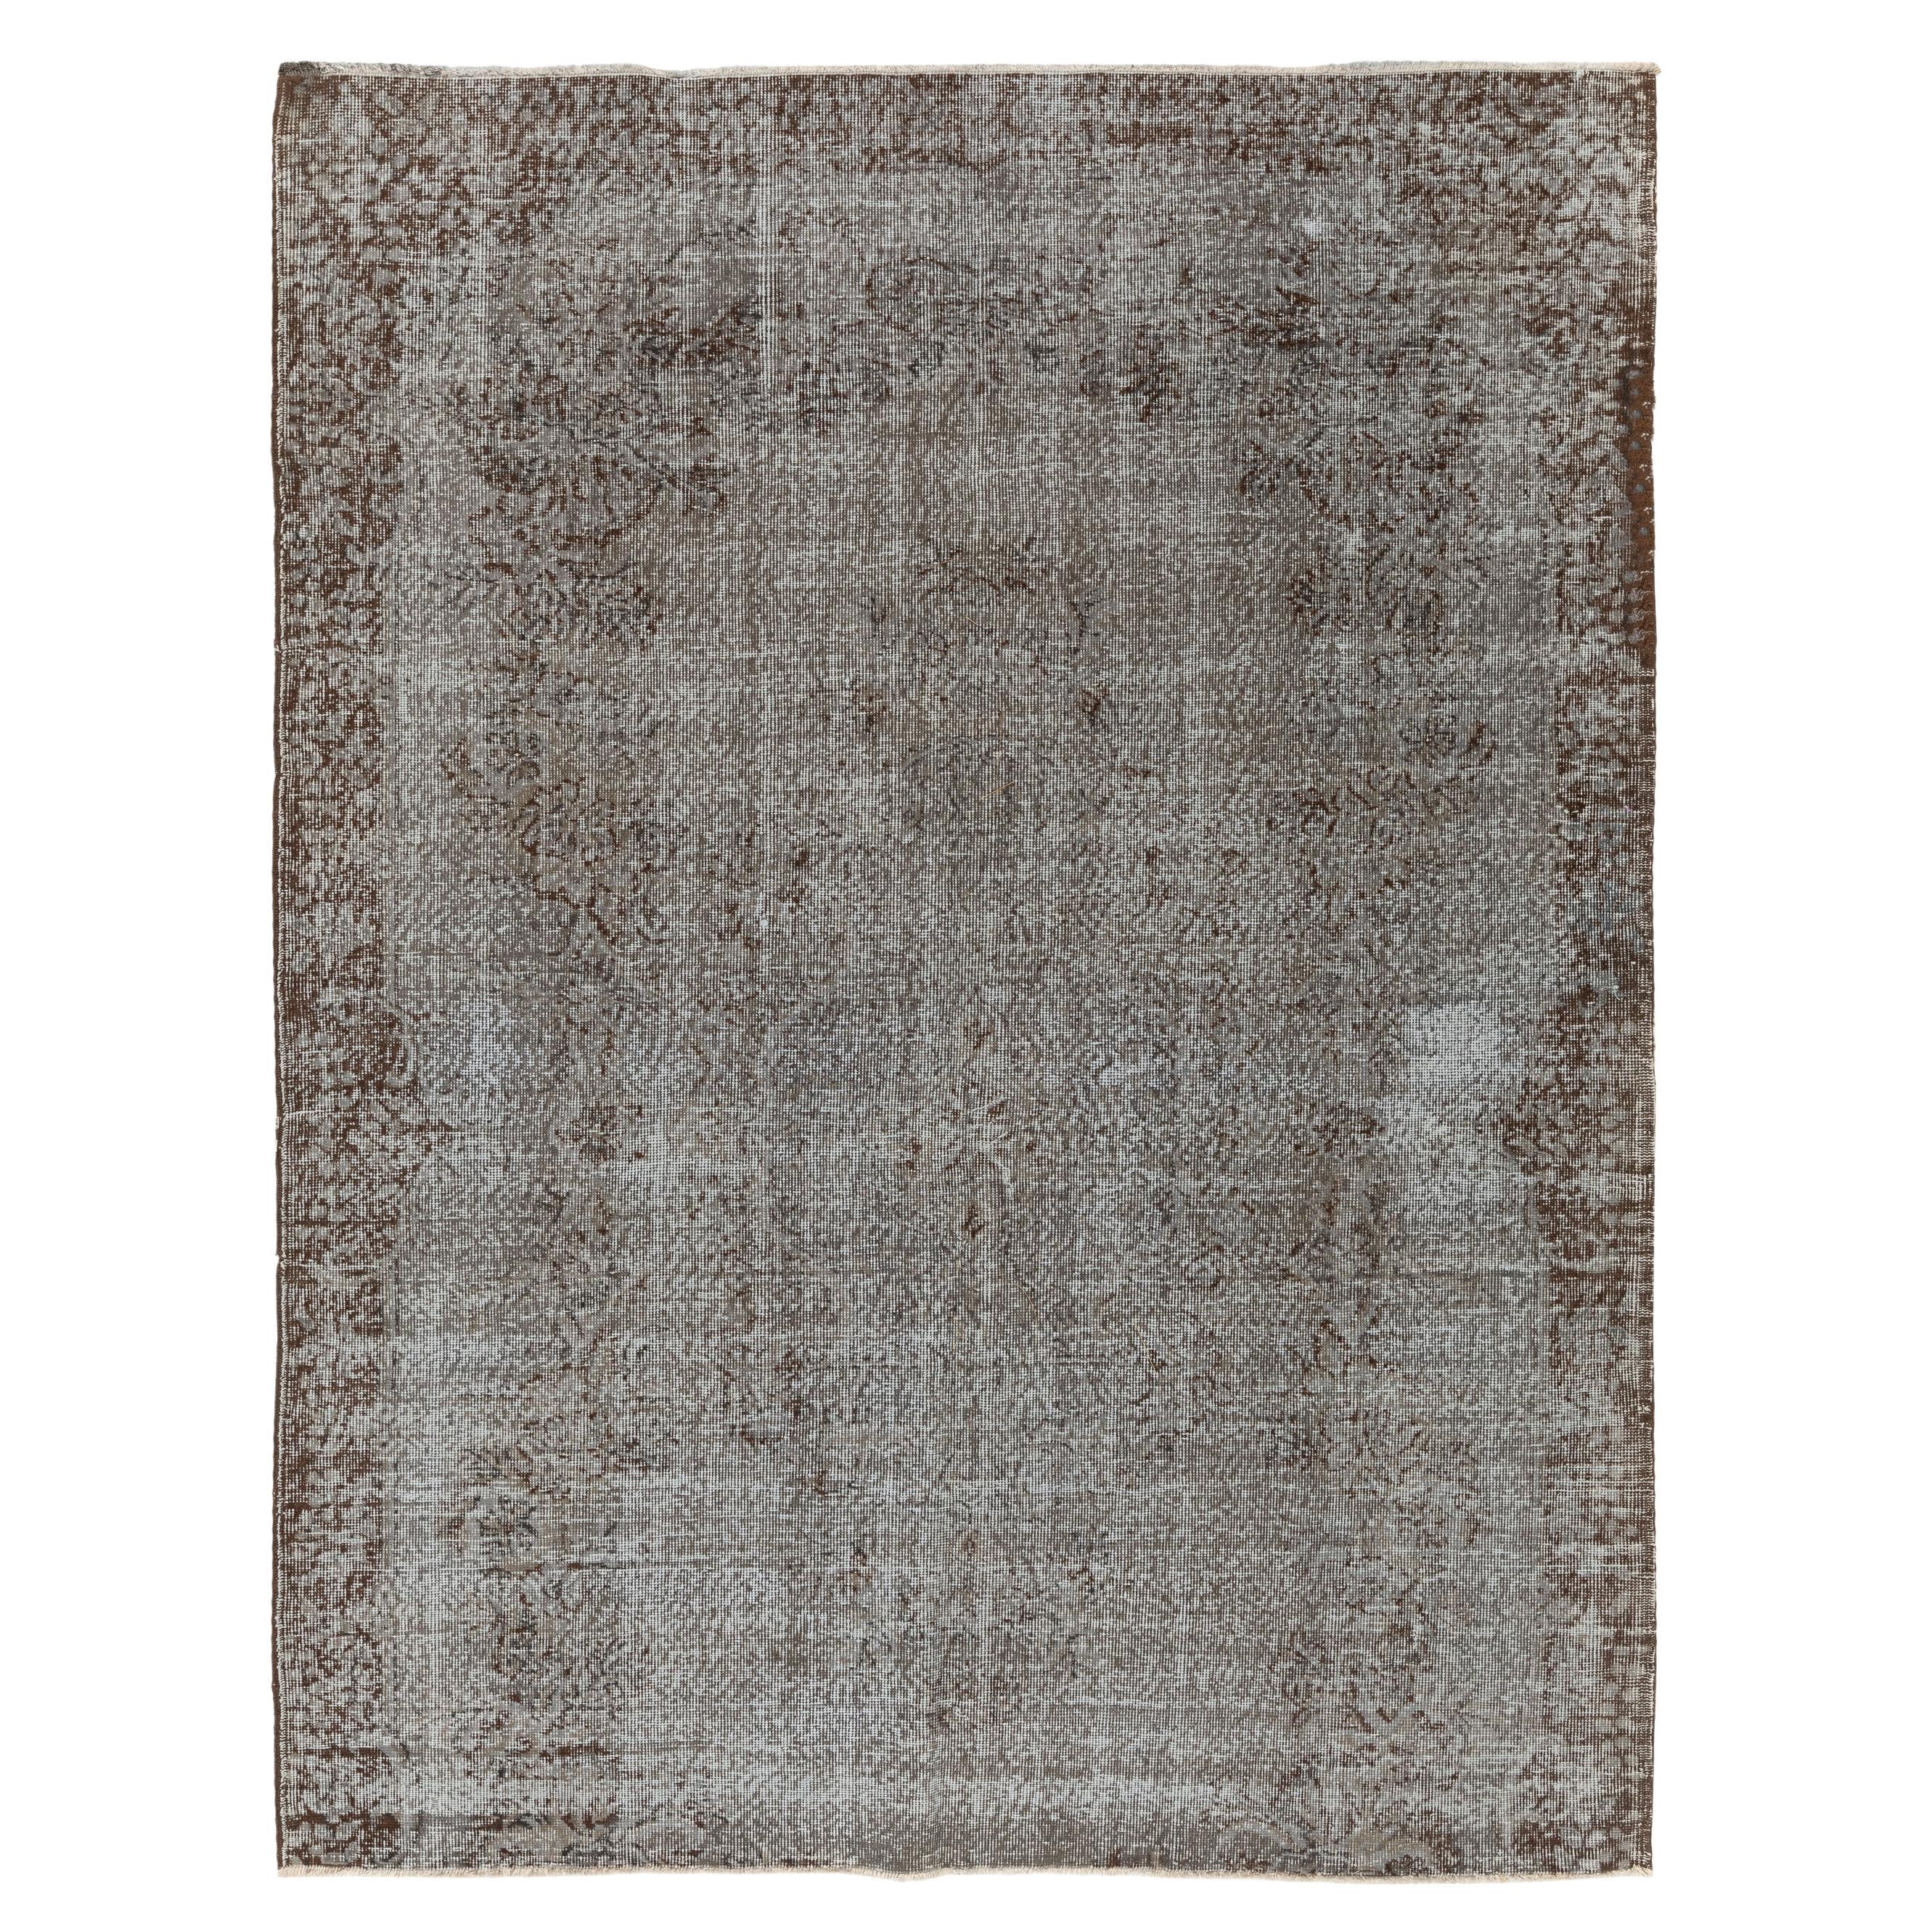 6.3x8.2 Ft Distressed Handmade Turkish Rug in Gray, Vintage Shabby Chic Carpet (Tapis vintage Shabby Chic)